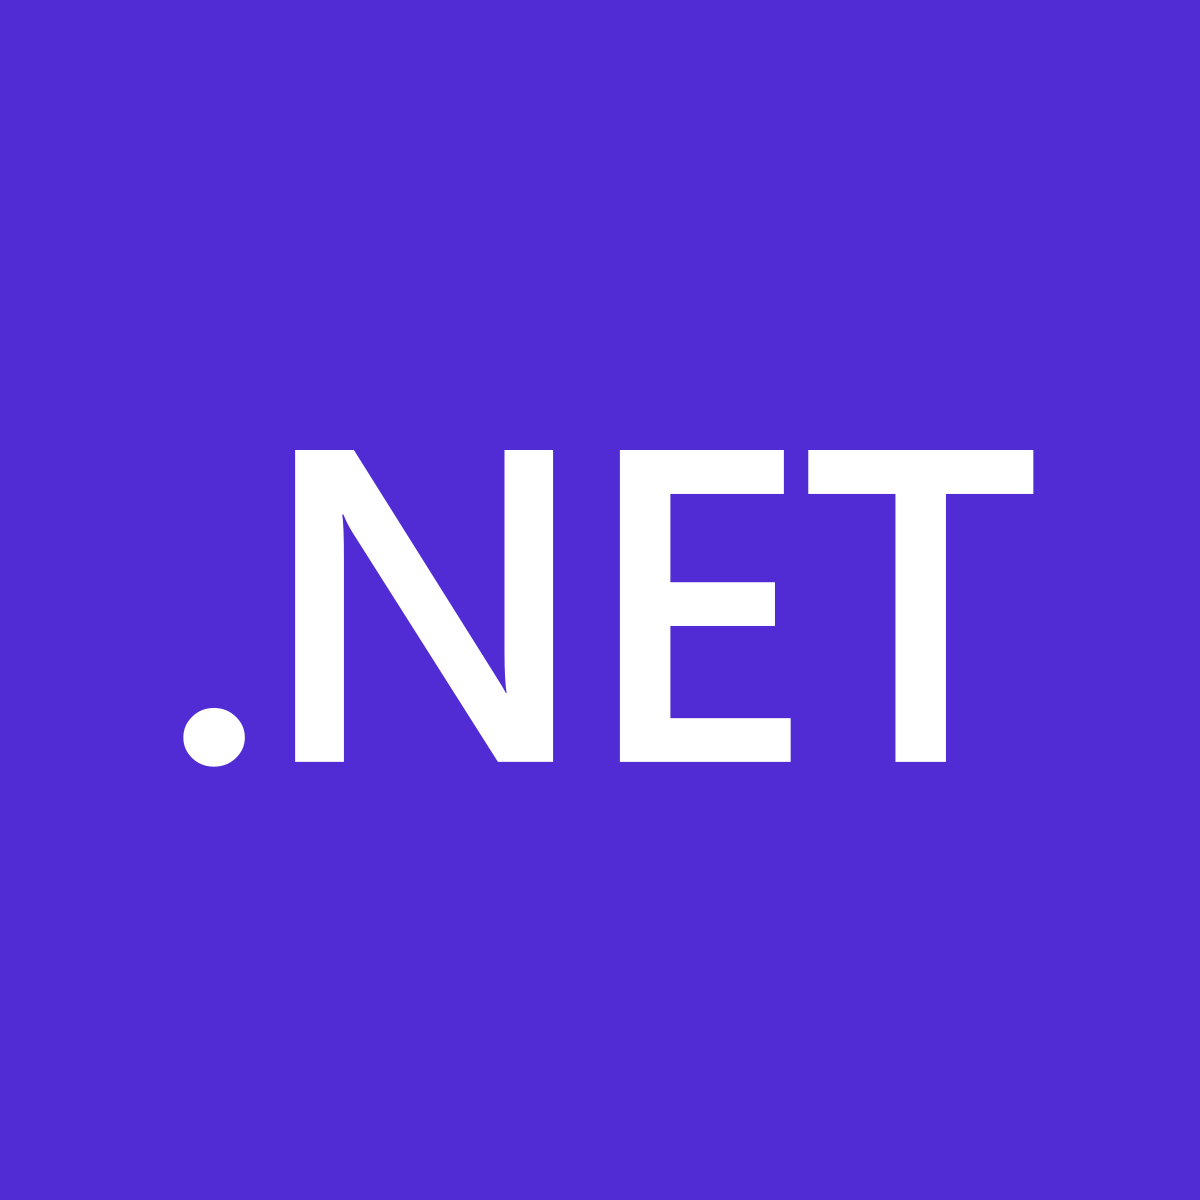 Cryptolens makes it easy to license and sell your .NET applications.